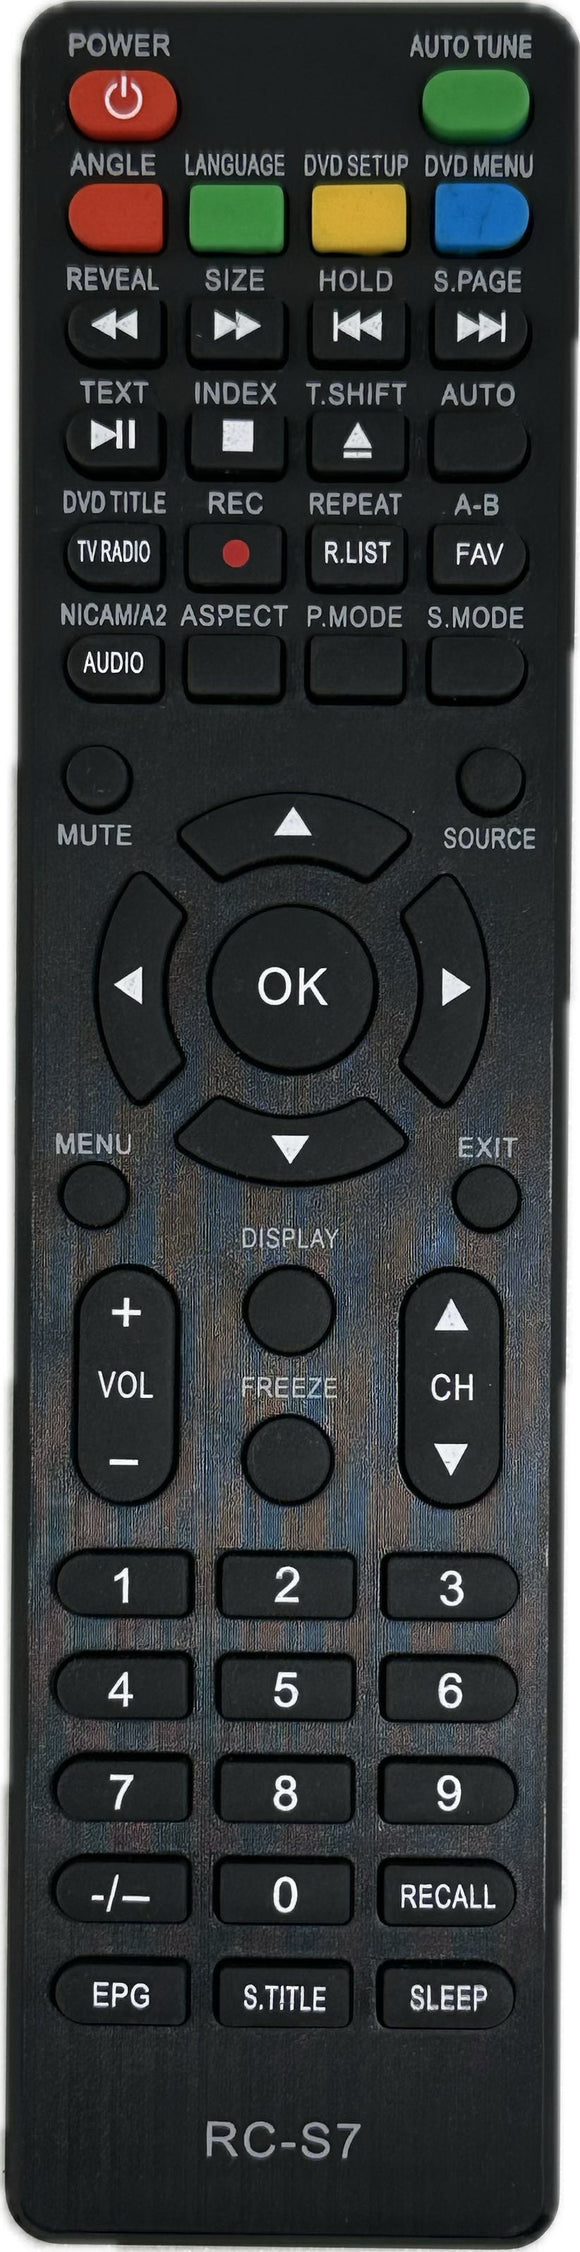 Sphere S7LED185BT TV Replacement Remote Control